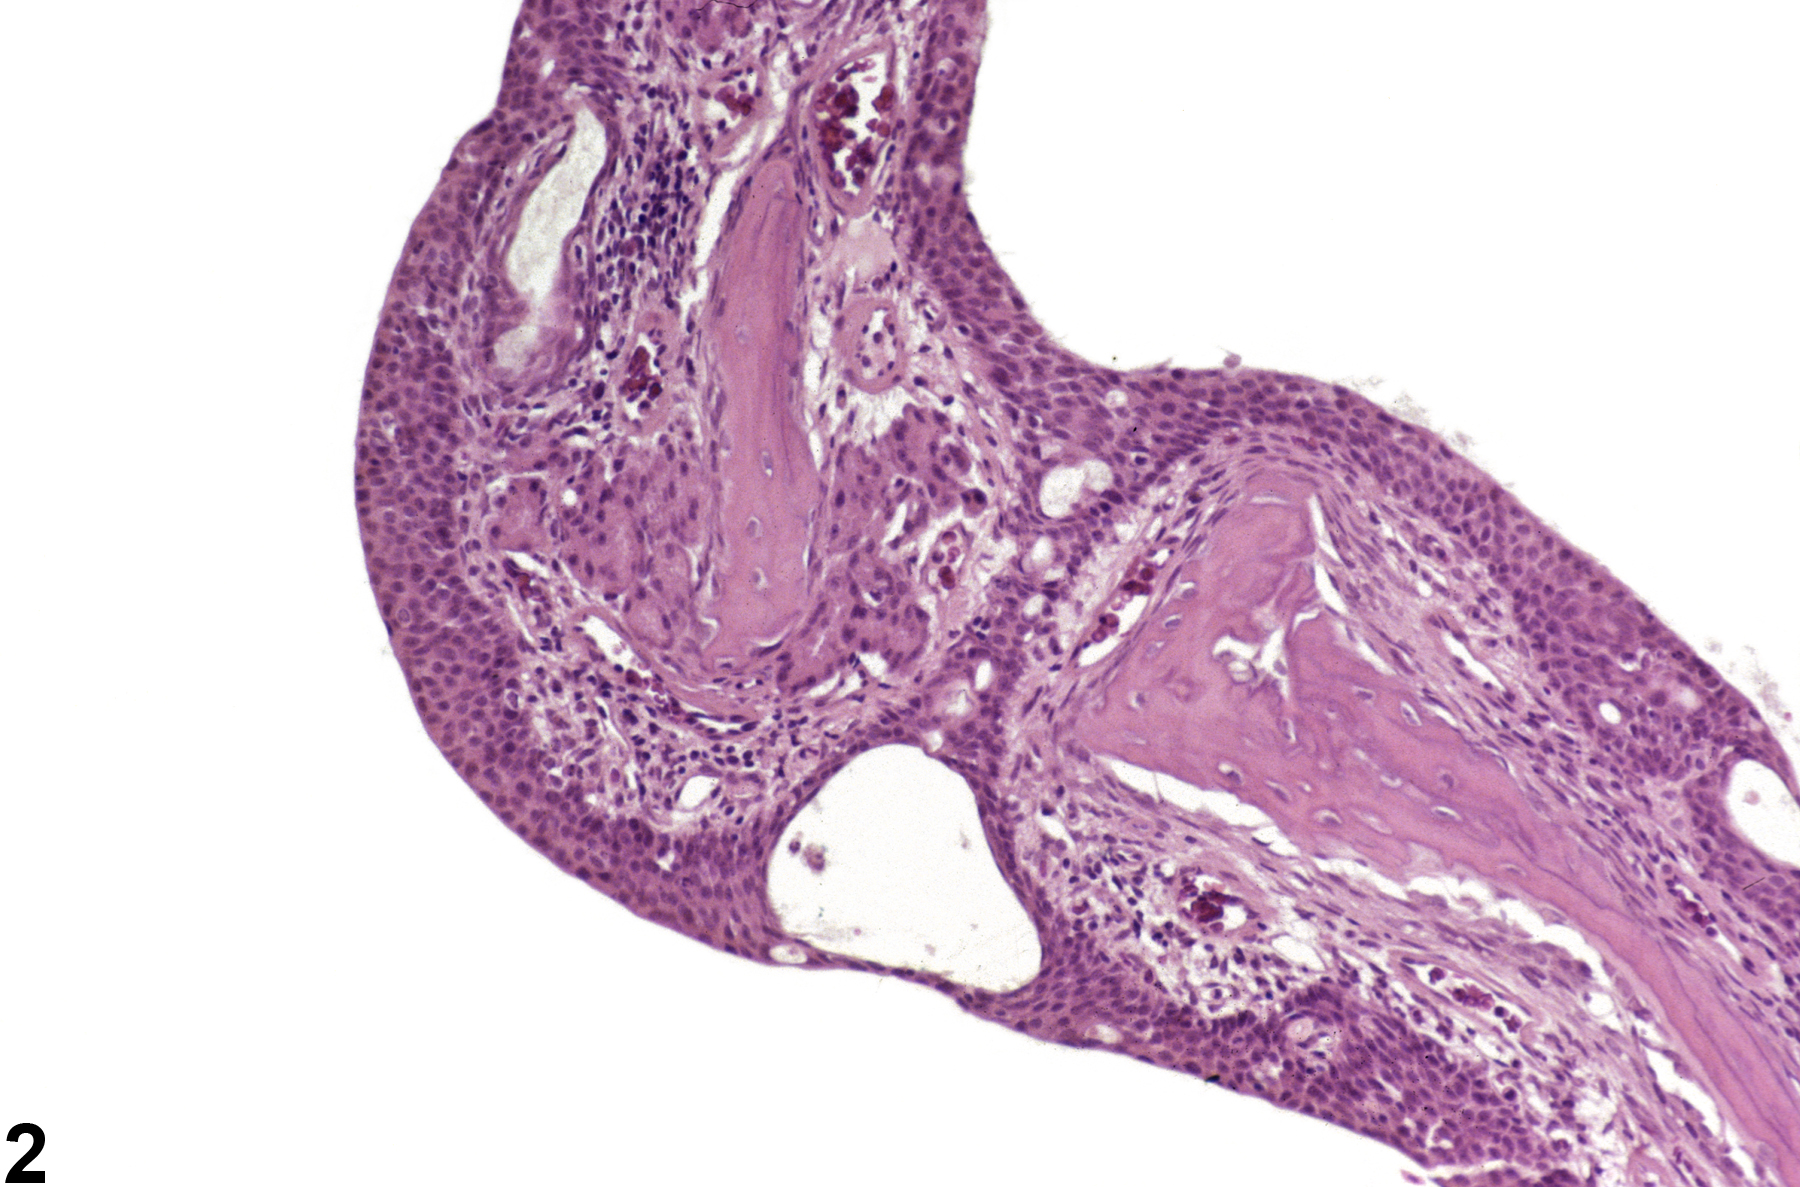 Image of synechia in the nose, turbinate from a male F344/N rat in a subchronic study